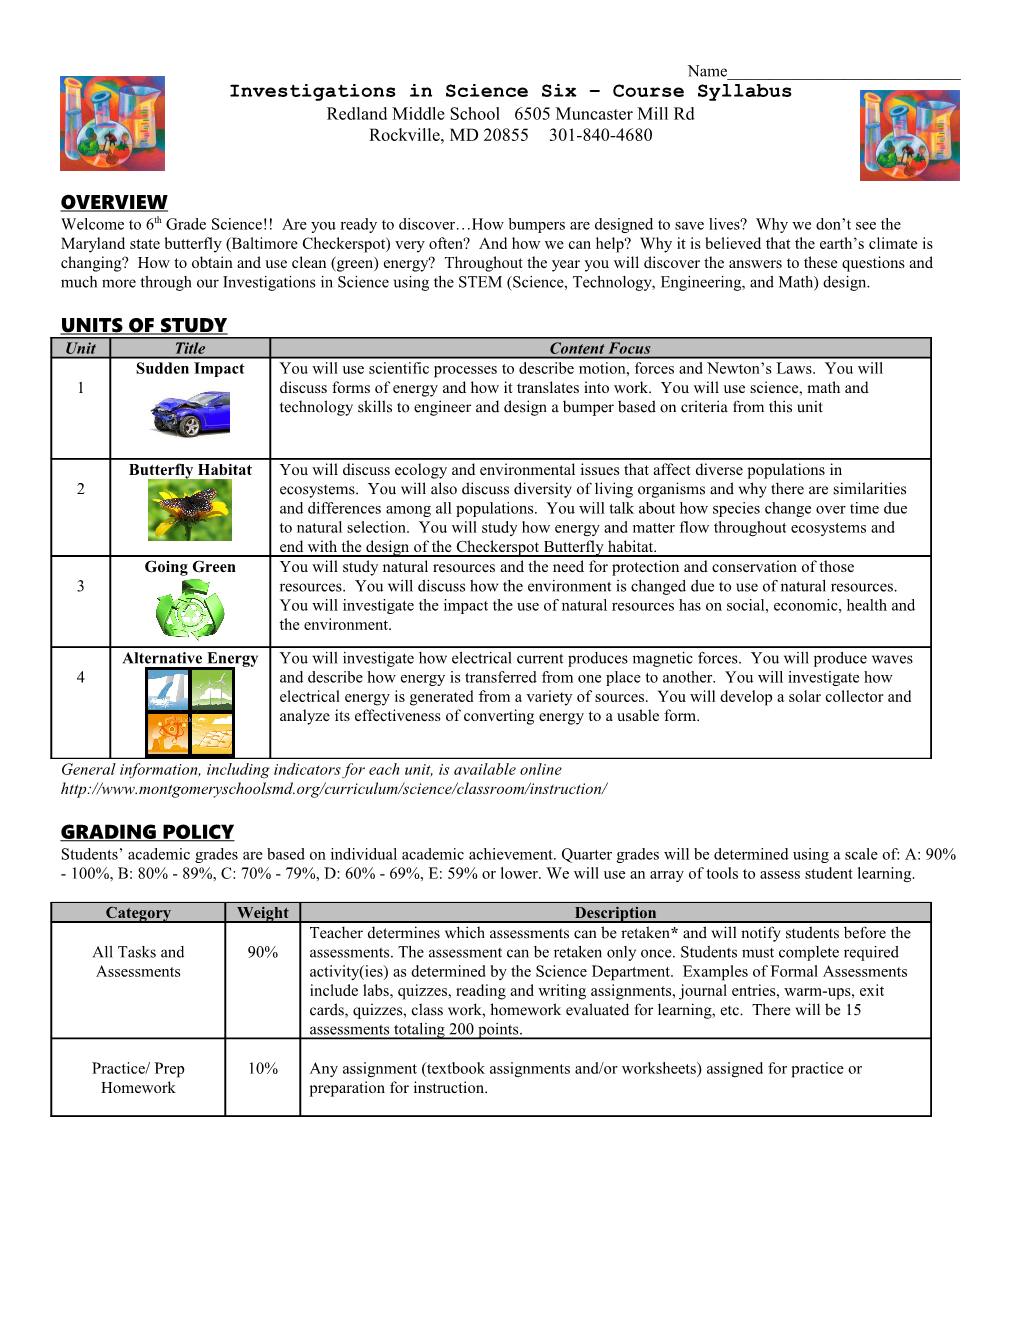 Investigations in Science Six Course Syllabus